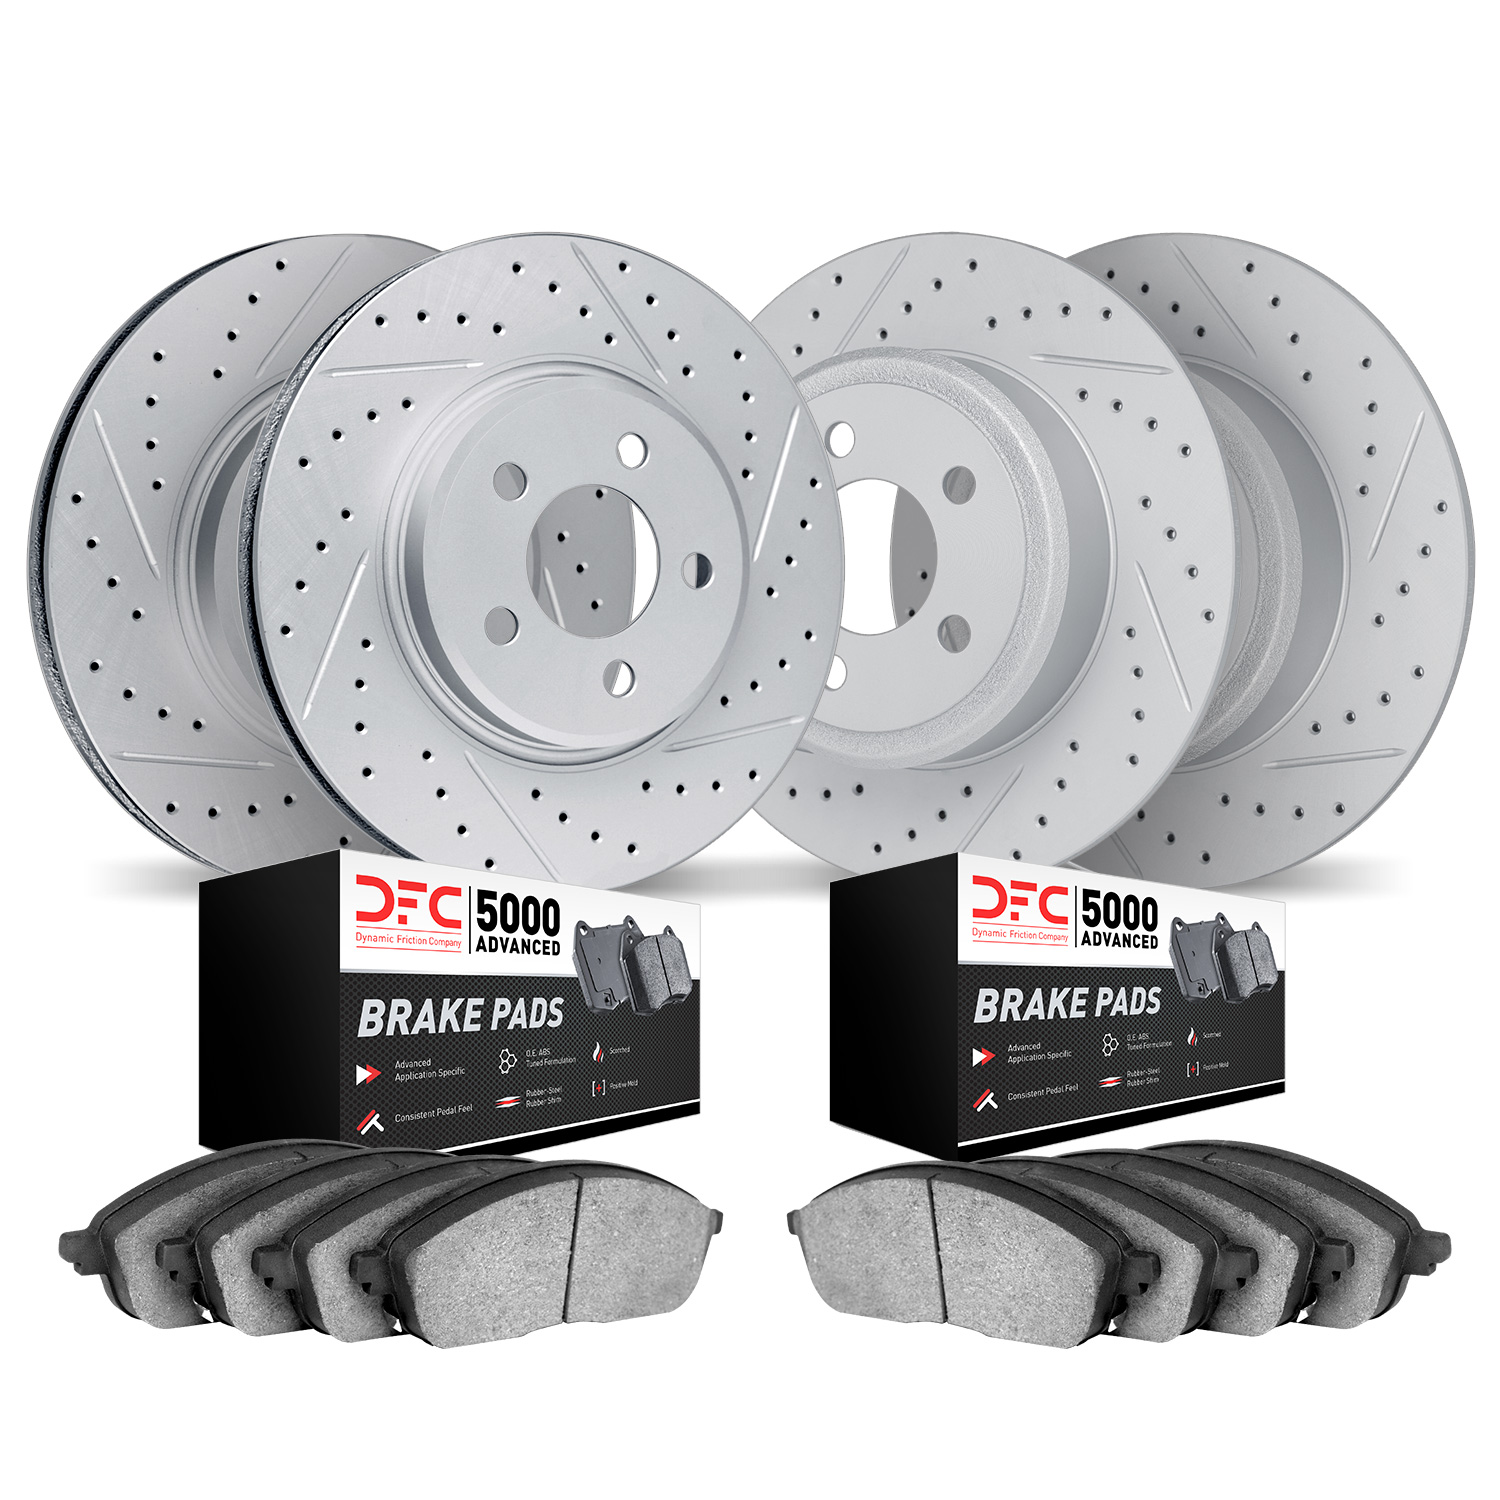 2504-55010 Geoperformance Drilled/Slotted Rotors w/5000 Advanced Brake Pads Kit, 2017-2020 Ford/Lincoln/Mercury/Mazda, Position: